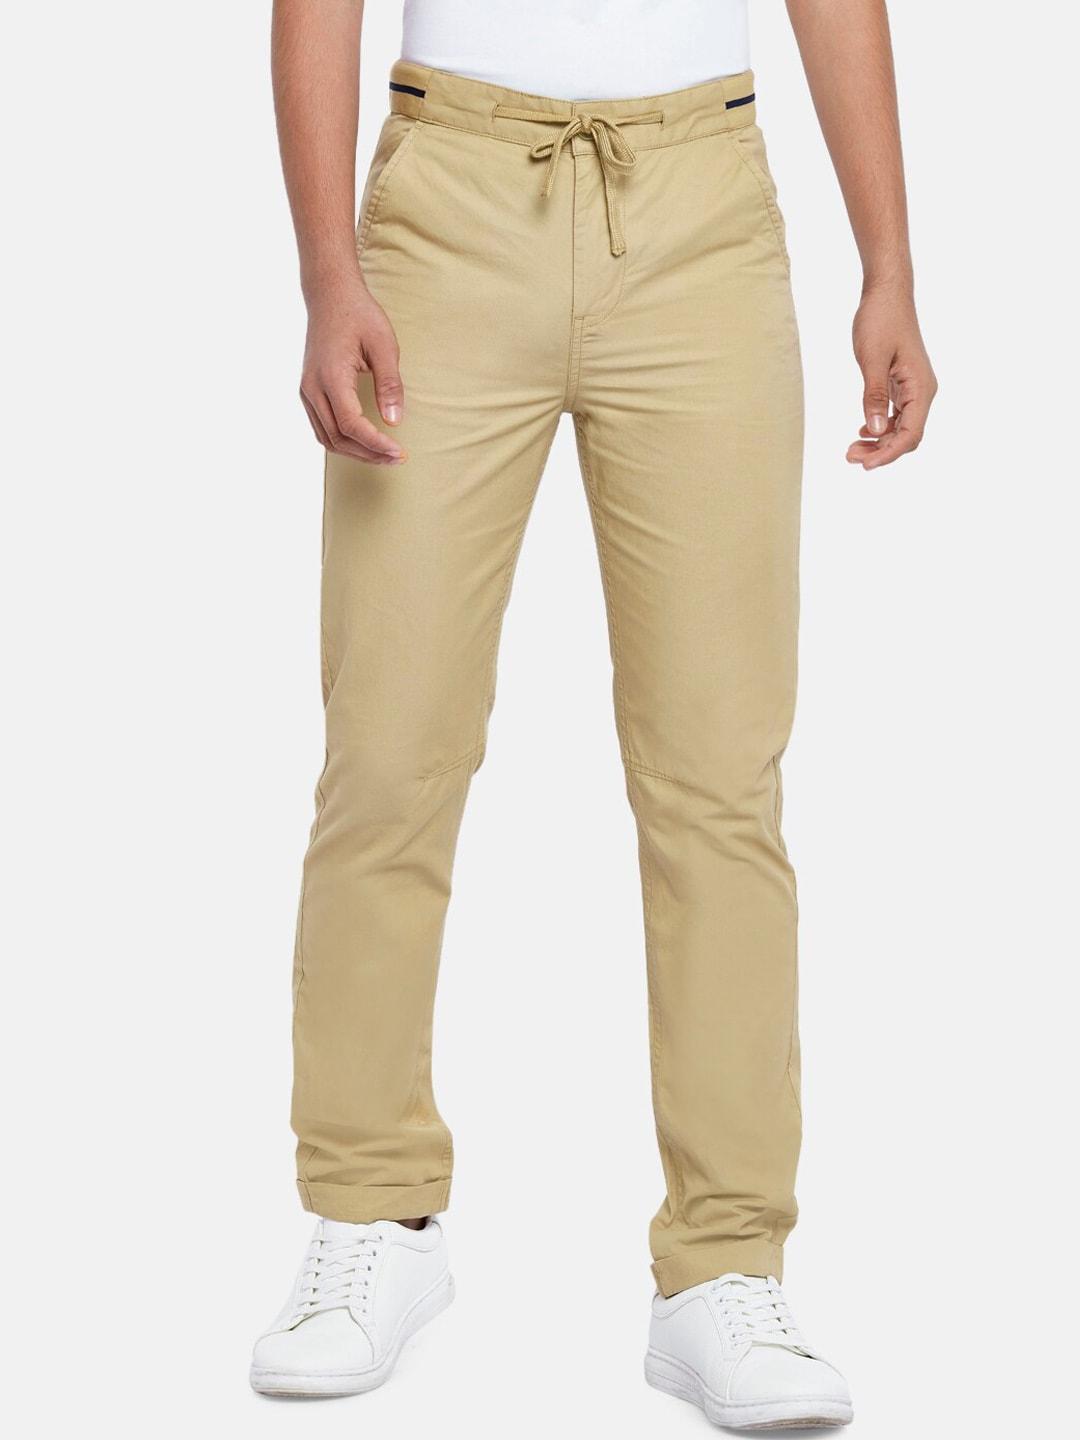 Coolsters by Pantaloons Boys Beige Solid Trousers